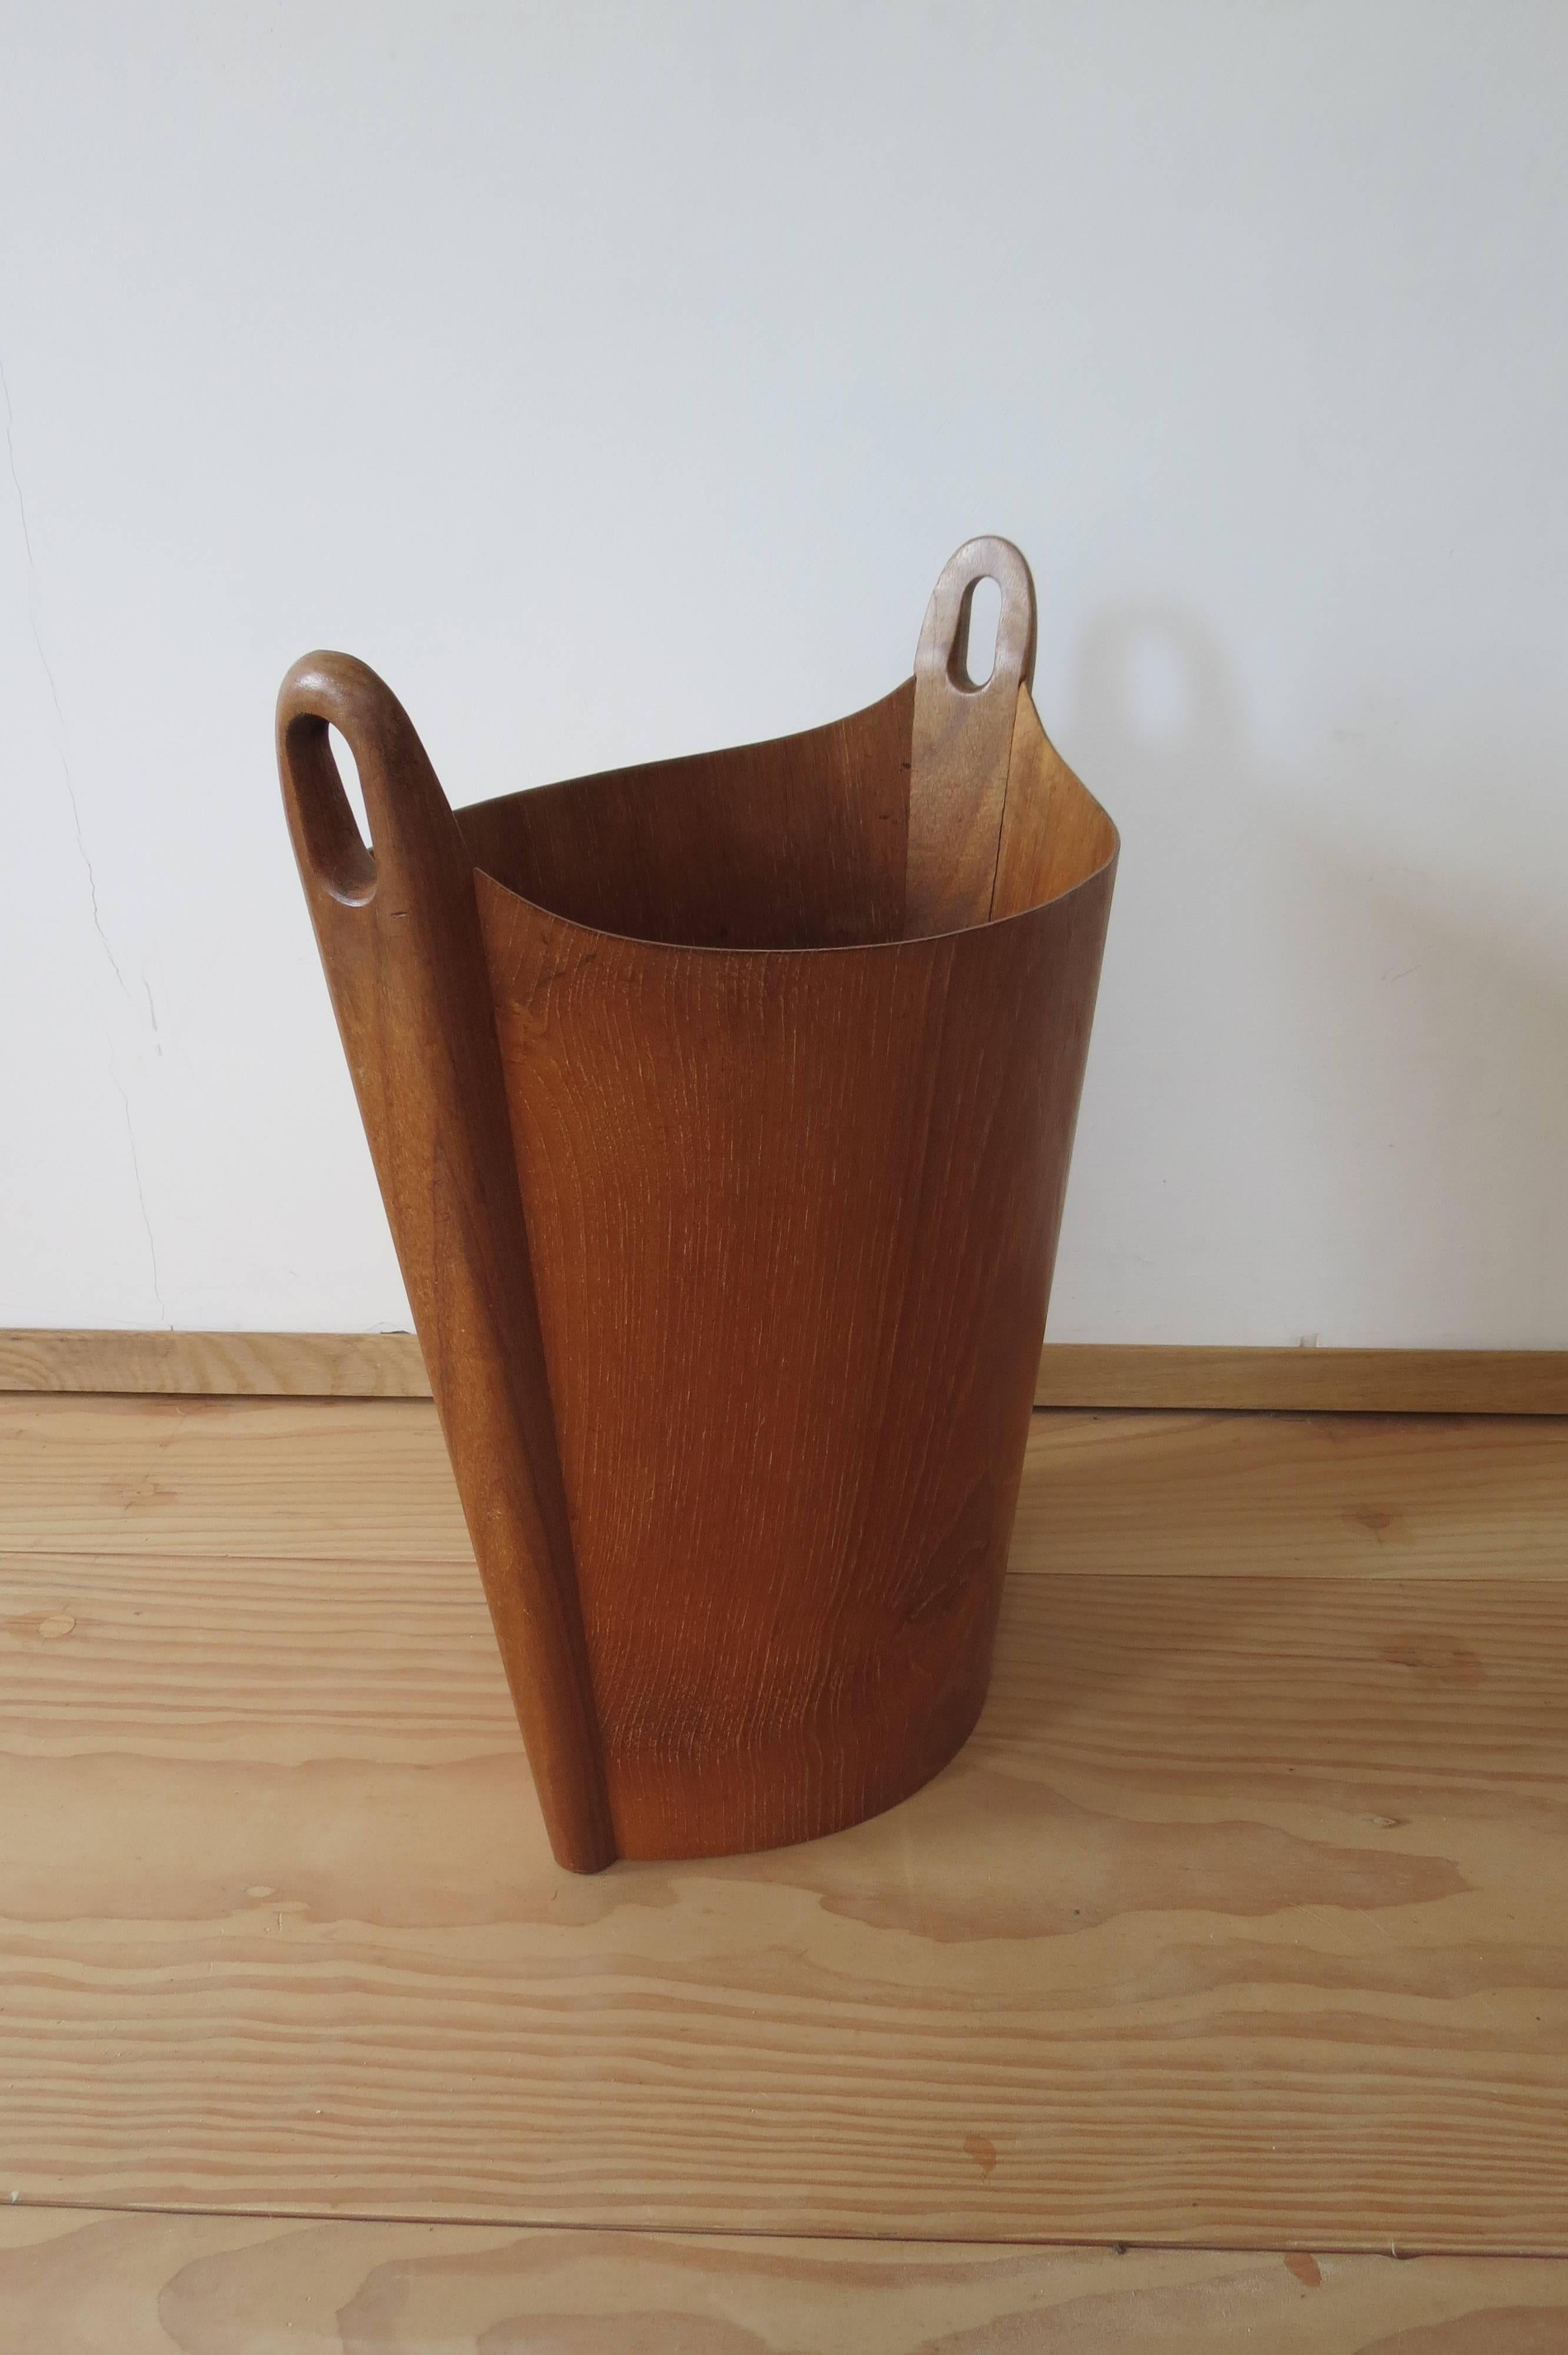 Teak waste paper basket from the 1950s, manufactured by PS Heggen Norway, designed by Einar Barnes.
Teak with afrormosia handles. In good overall condition, some staining to the inside as shown in the photo.
Stamped to underside P S Heggen